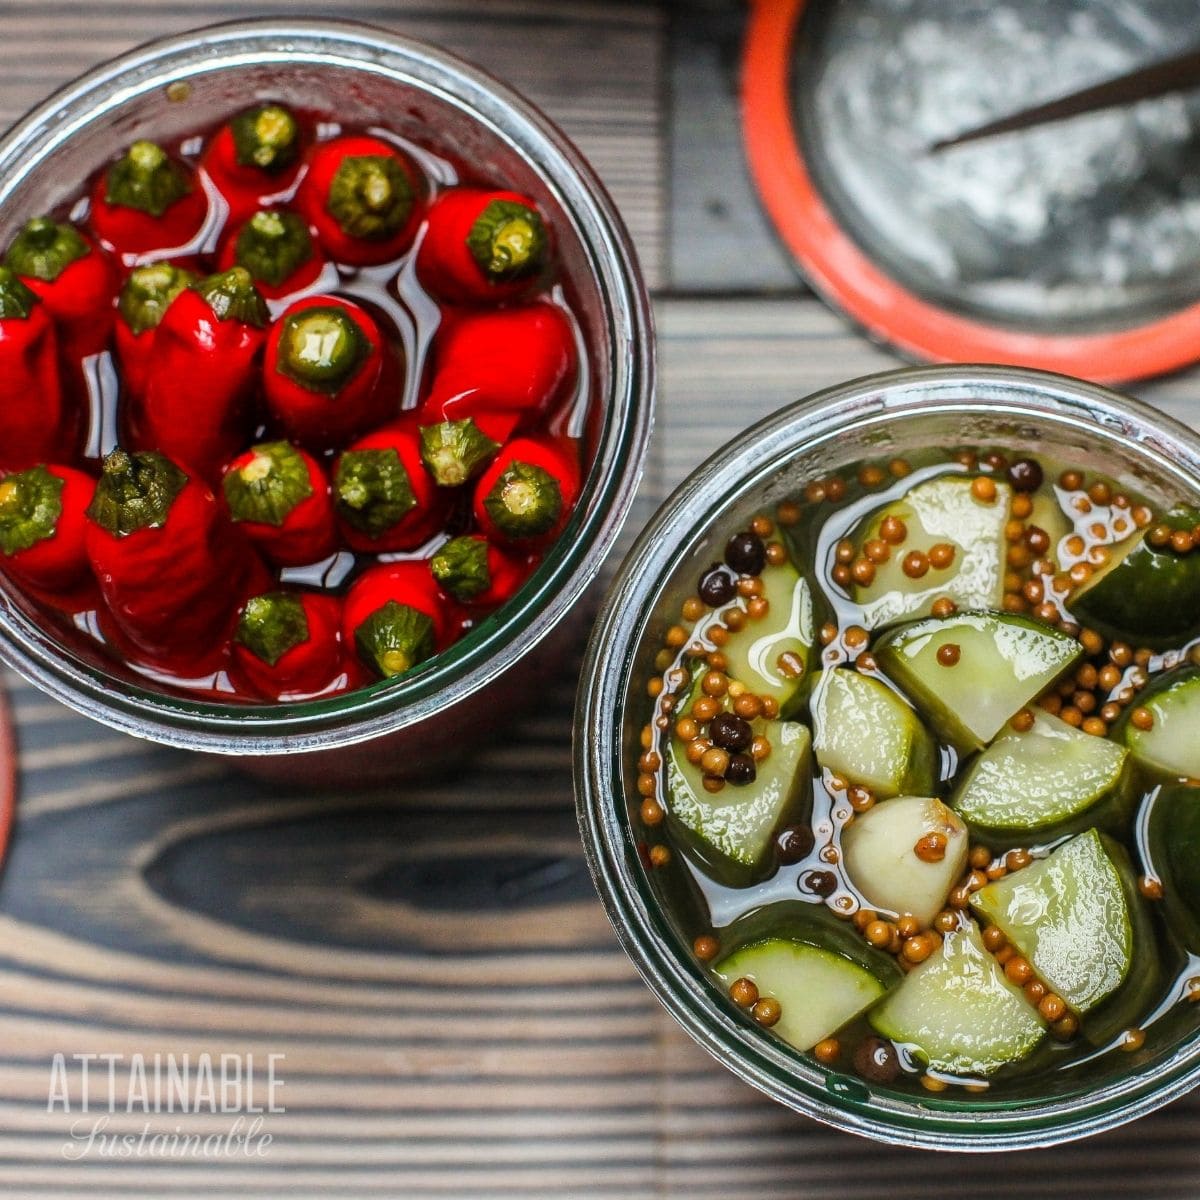 bright red pepper pickles and cucumber pickles in jars from above.